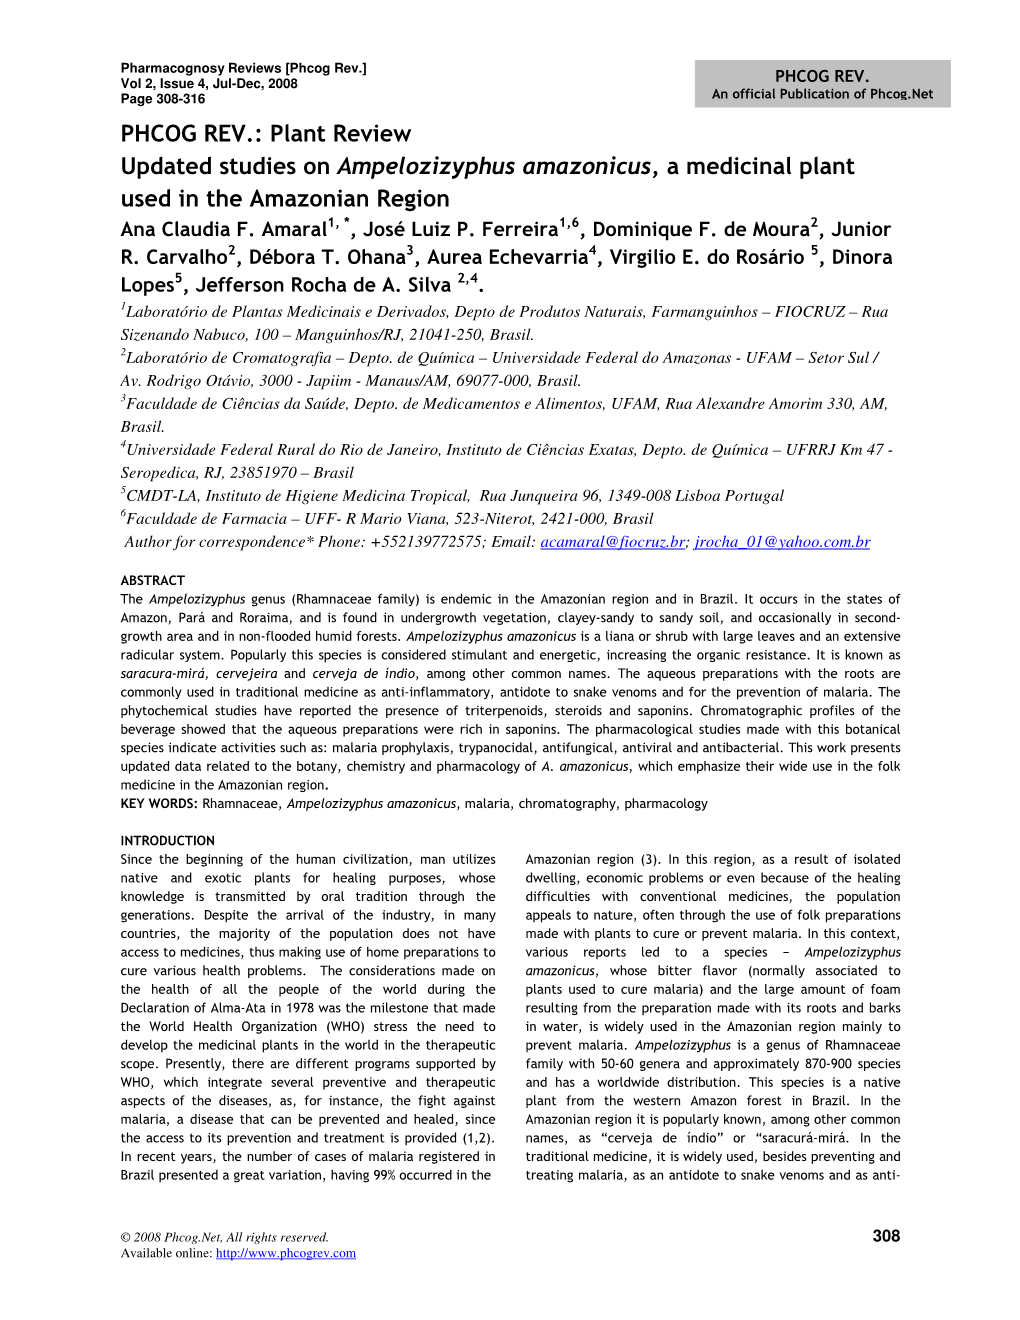 PHCOG REV.: Plant Review Updated Studies on Ampelozizyphus Amazonicus , a Medicinal Plant Used in the Amazonian Region Ana Claudia F